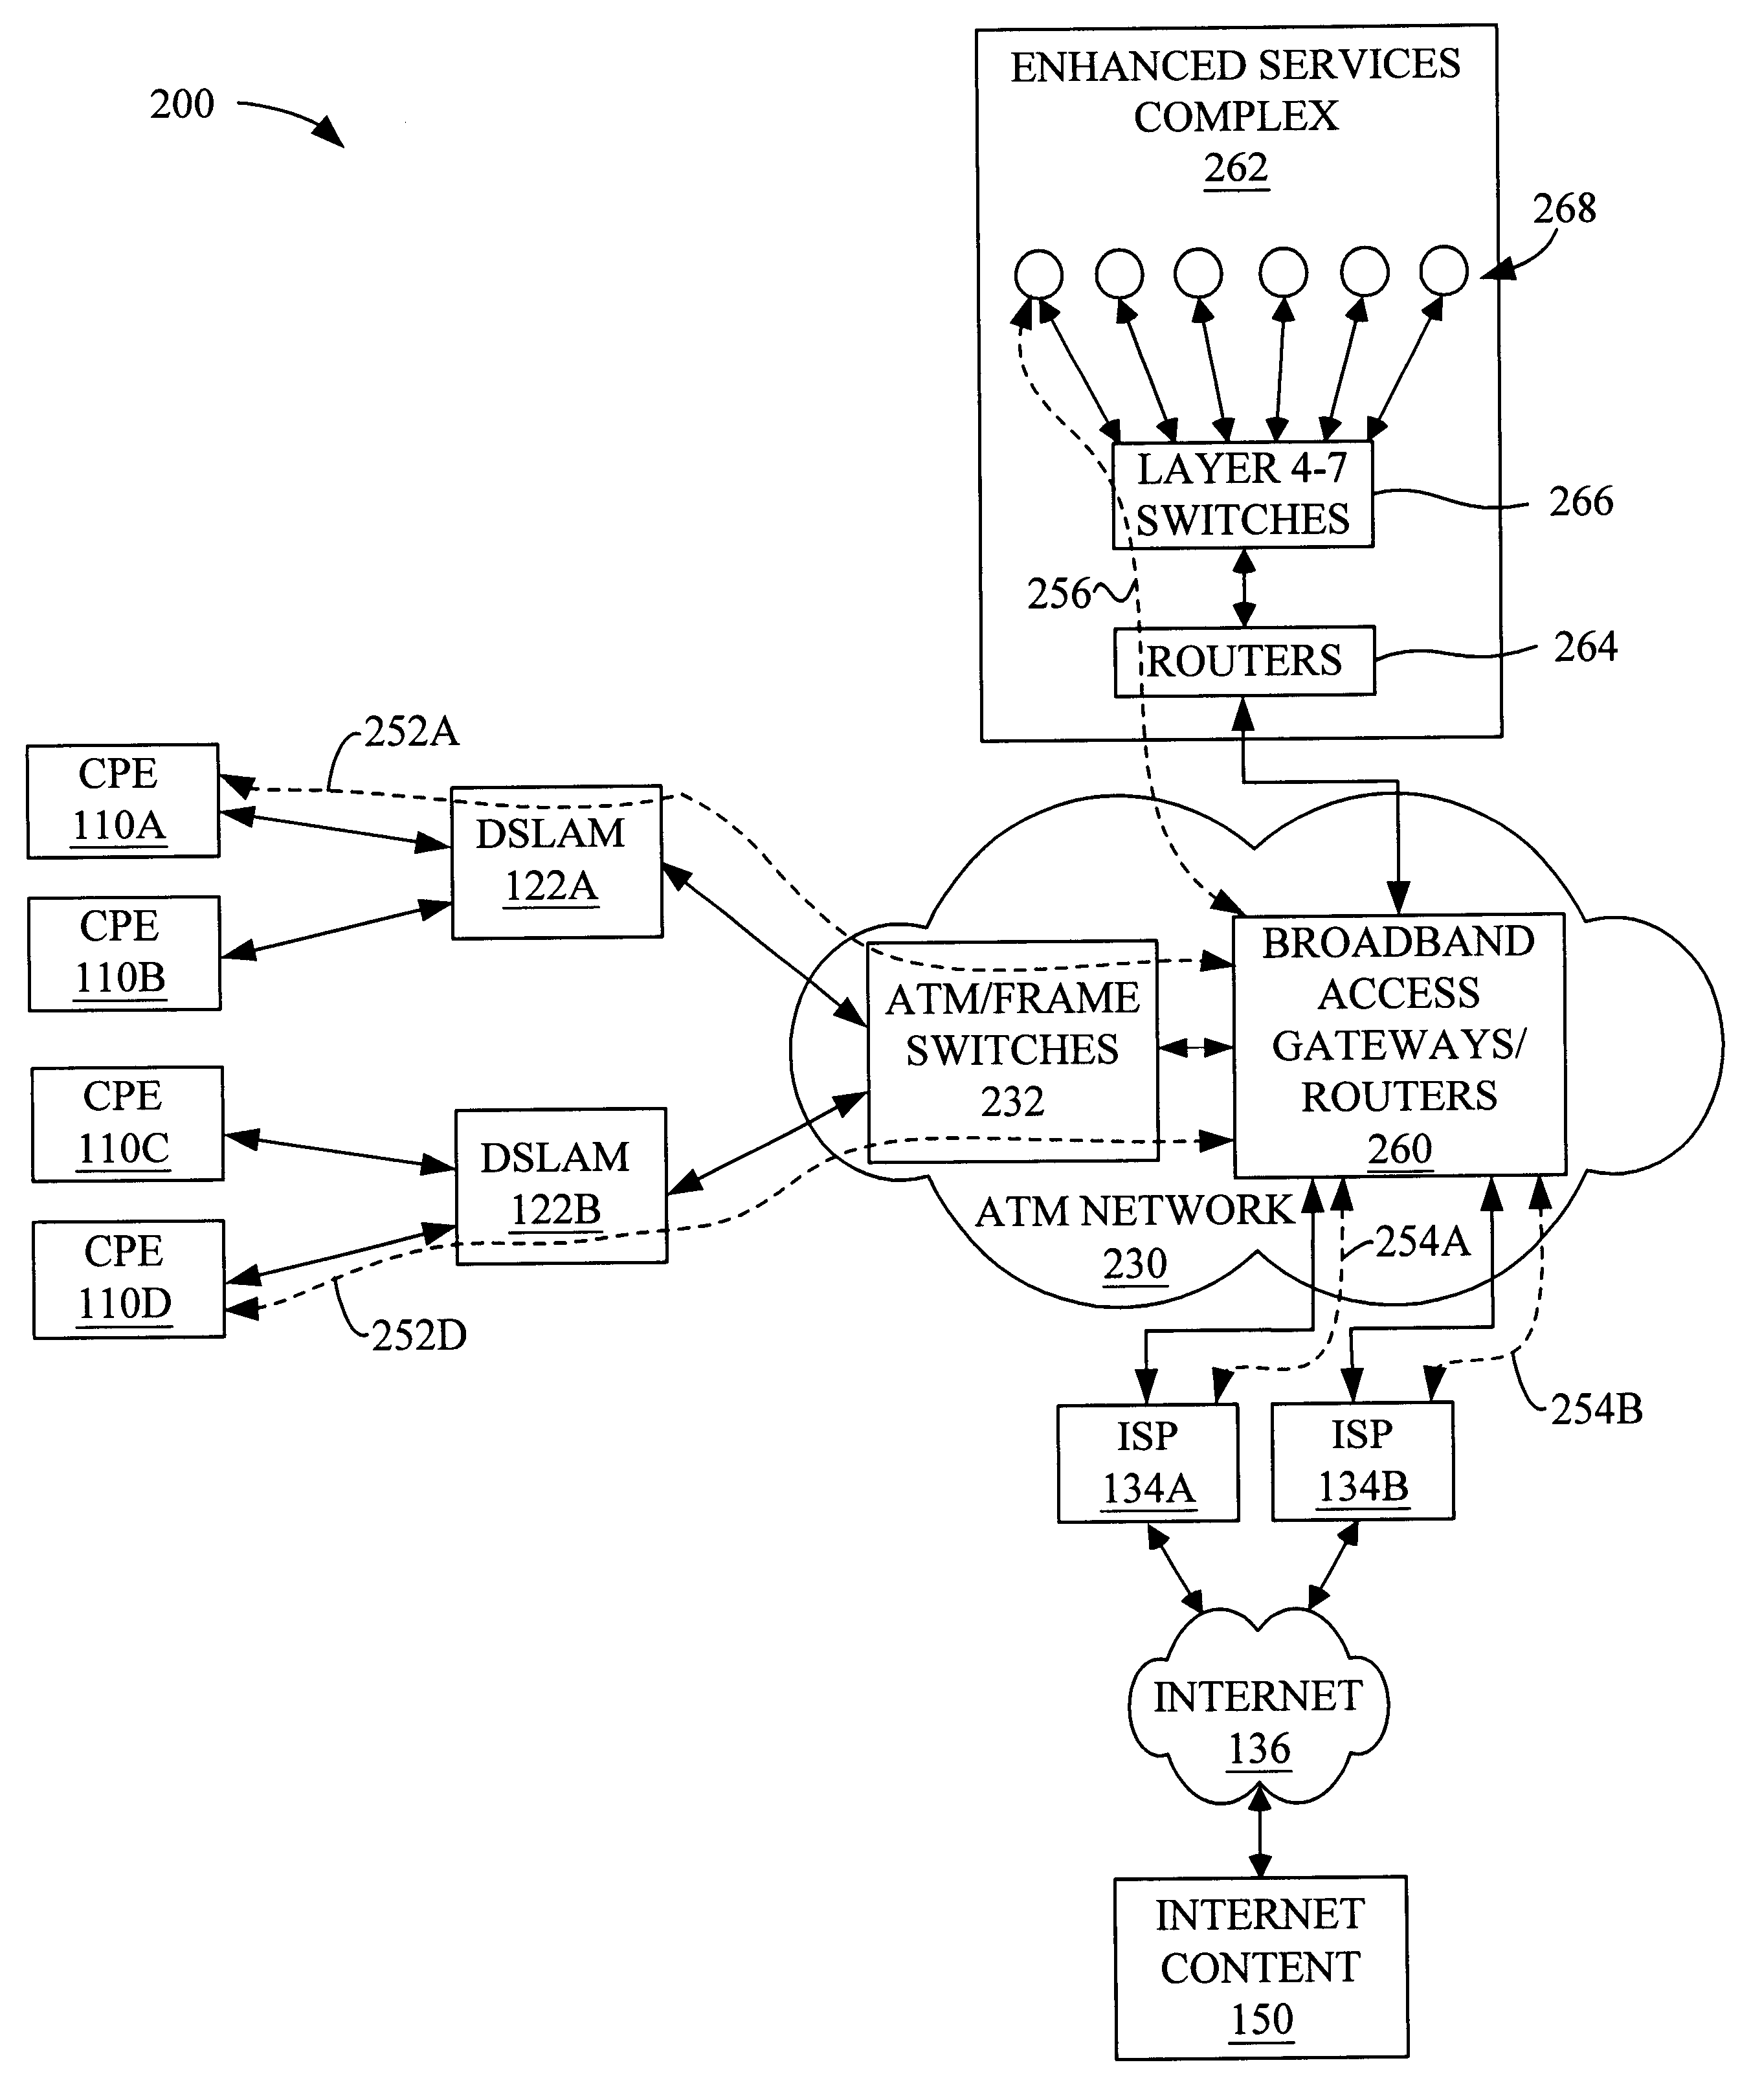 System and method for providing broadband content to high-speed access subscribers